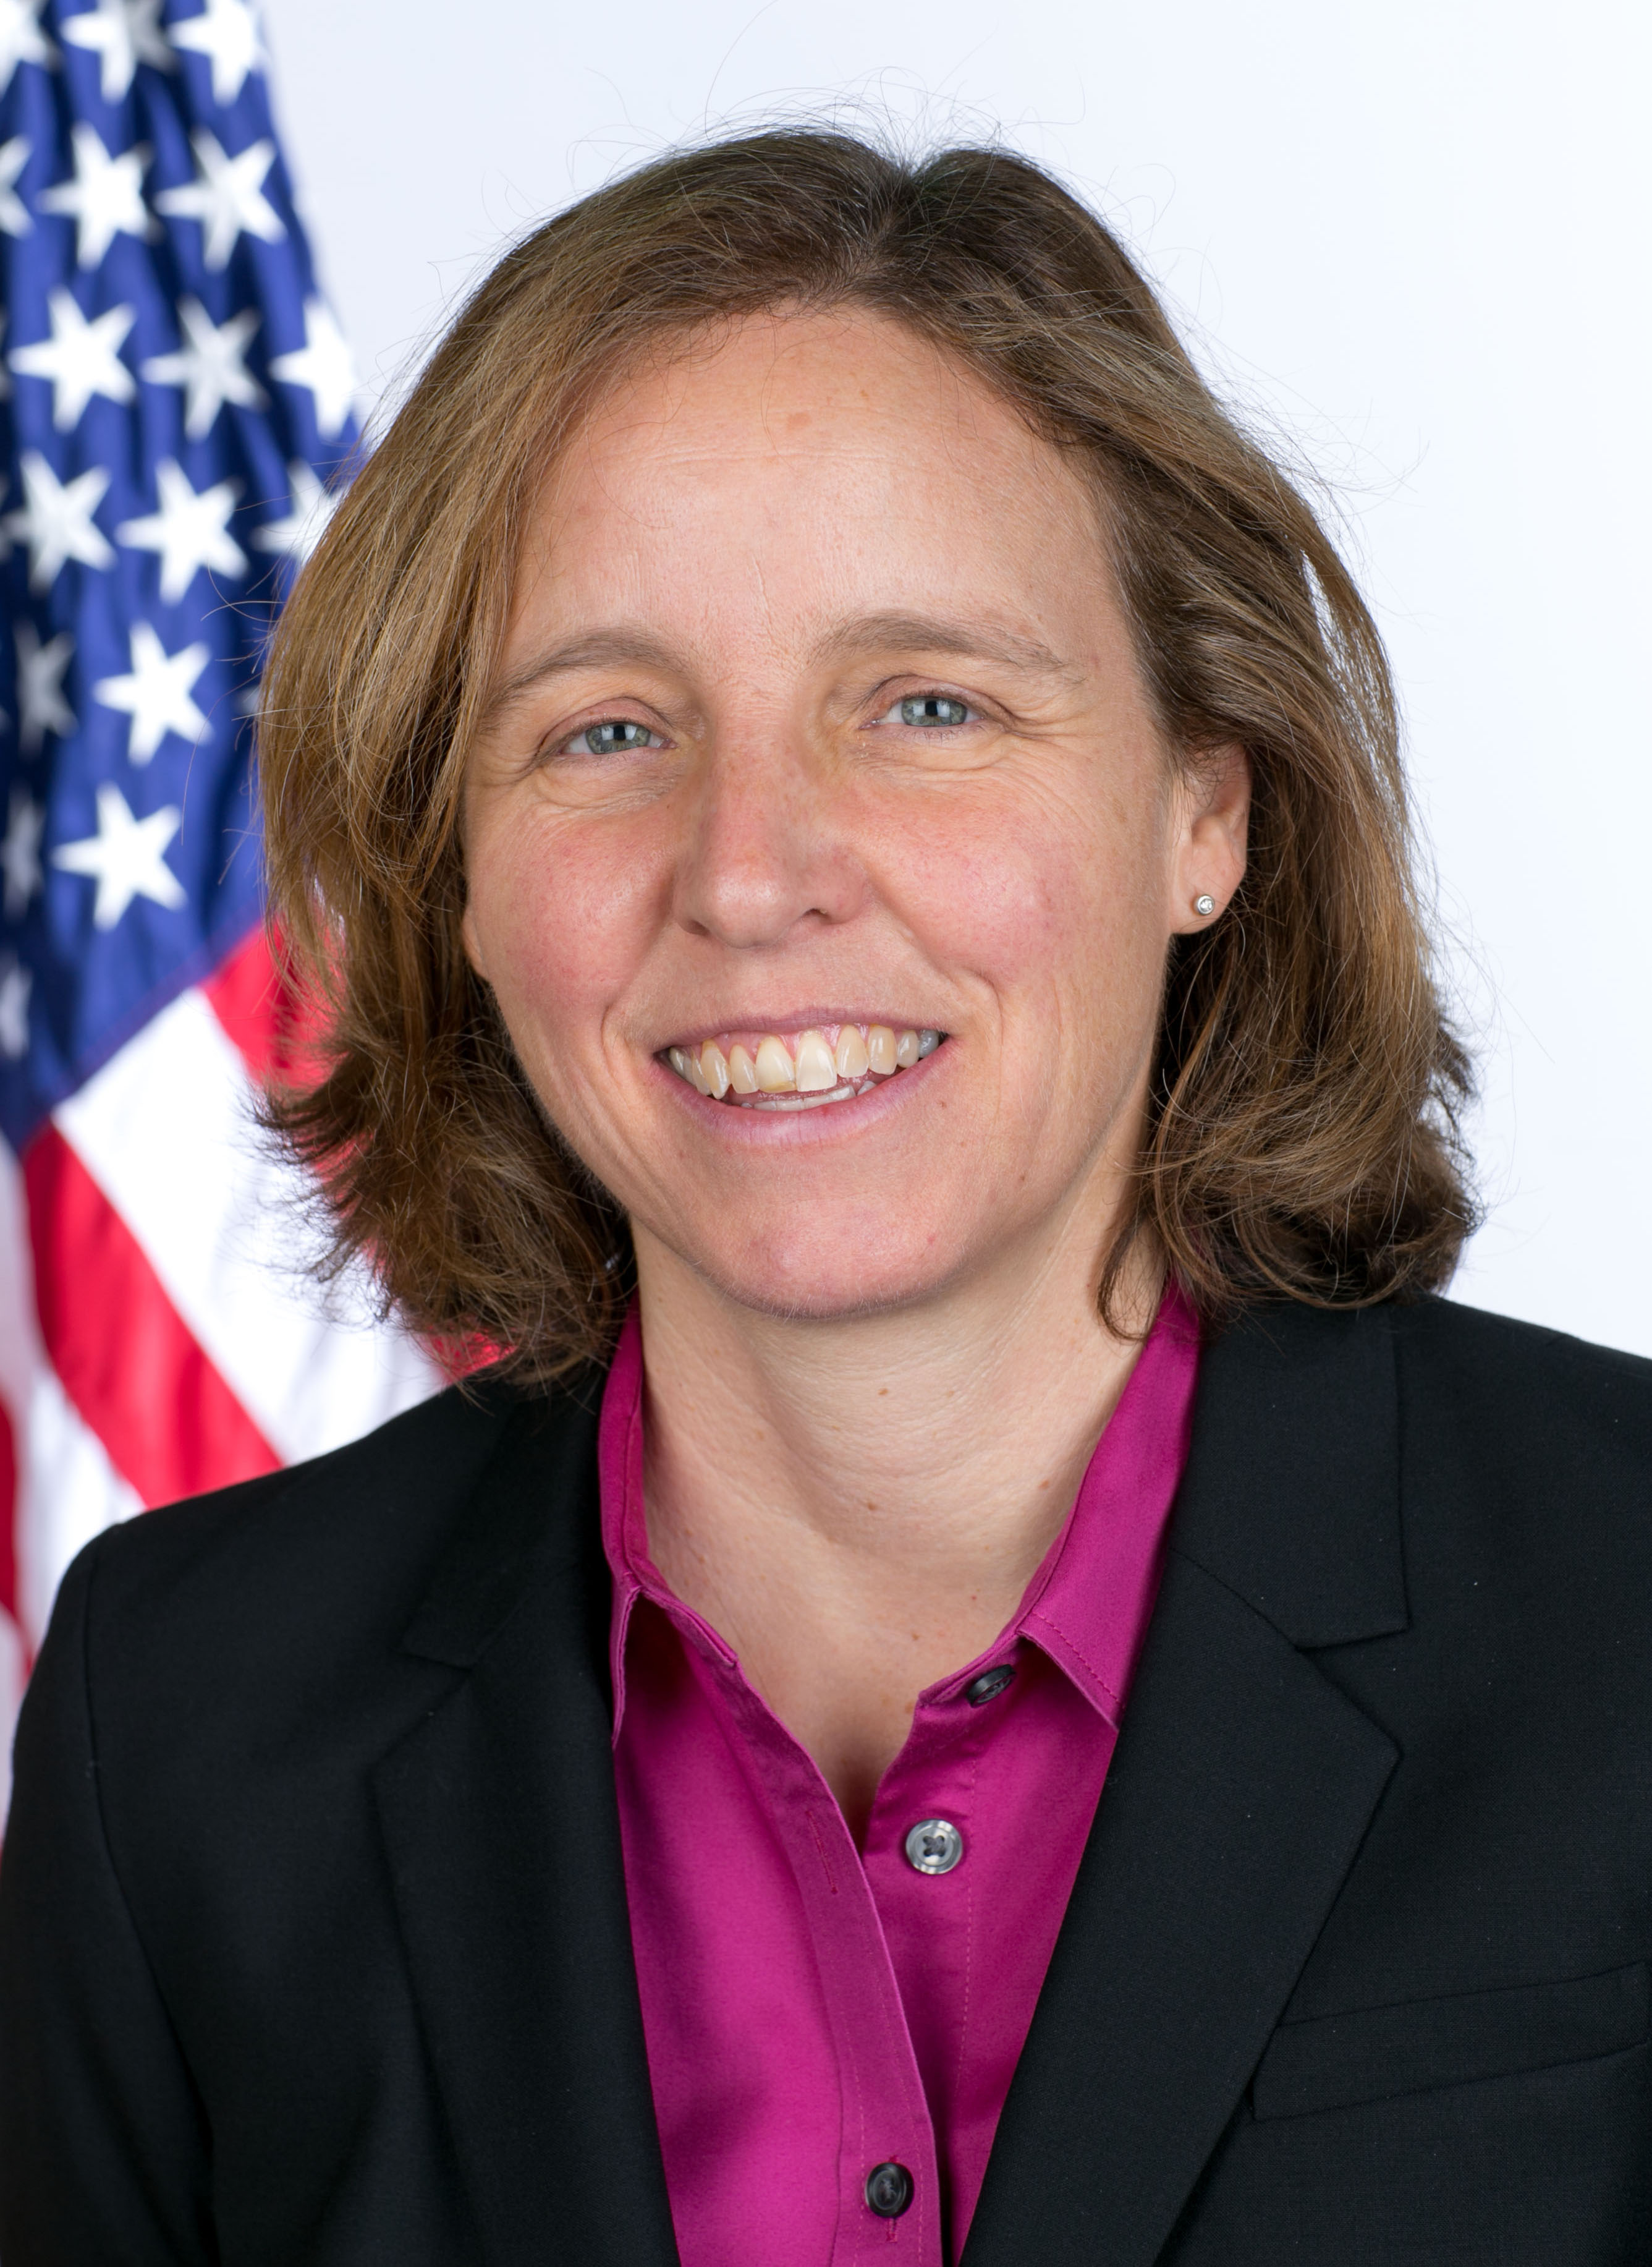 Megan Smith, OSTP, portrait taken during the commissioned officer portrait session in the Eisenhower Executive Office Building of the White House, Sept. 30, 2014. (Official White House Photo by Chuck Kennedy)